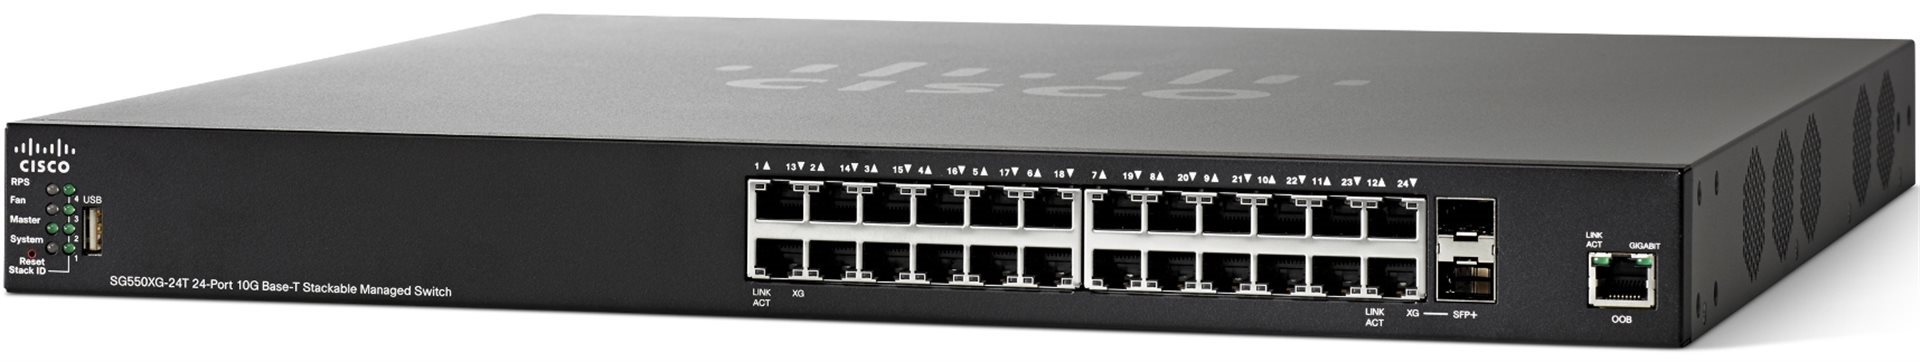 Cisco SG350XG-24T-K9 24-port 10GBase-T Stackable Switch